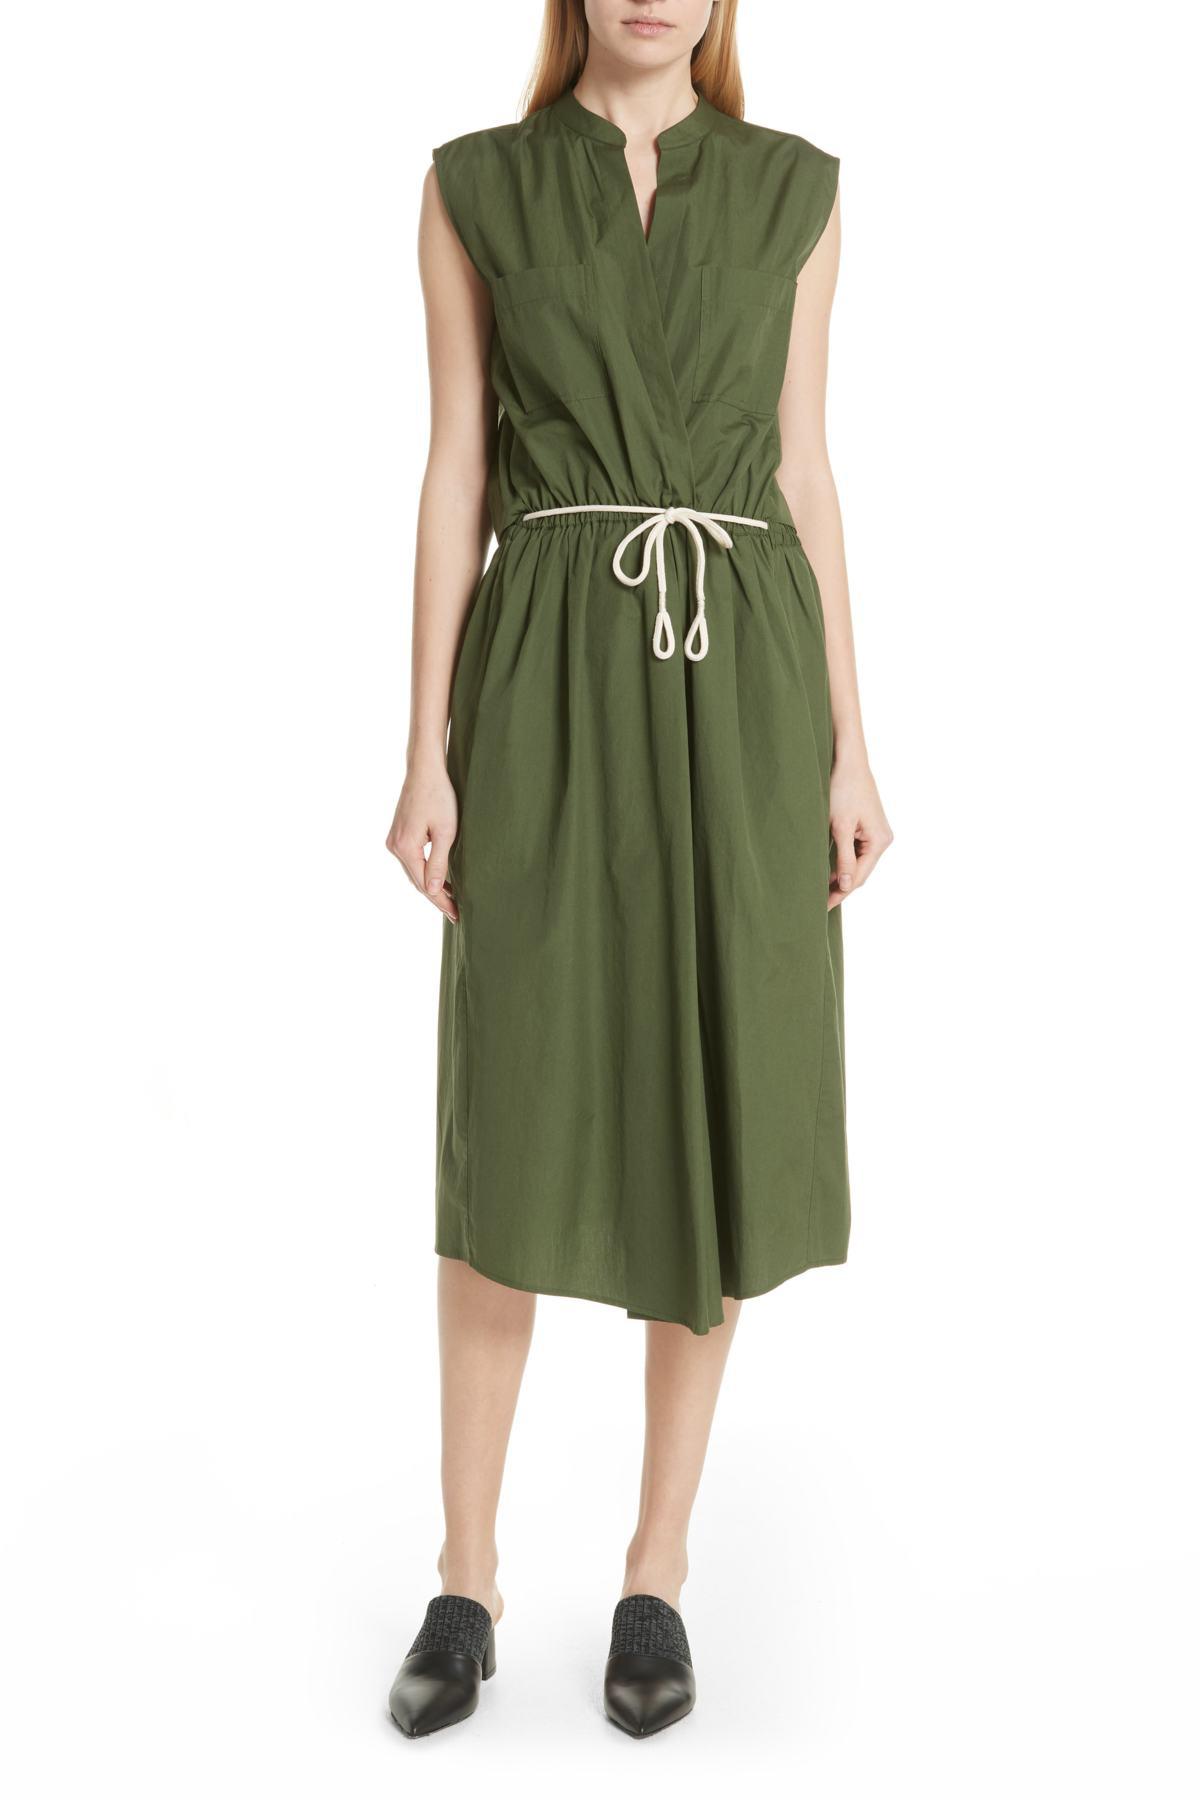 Lyst - Vince Back Cutout Cotton Utility Dress in Green - Save 60. ...